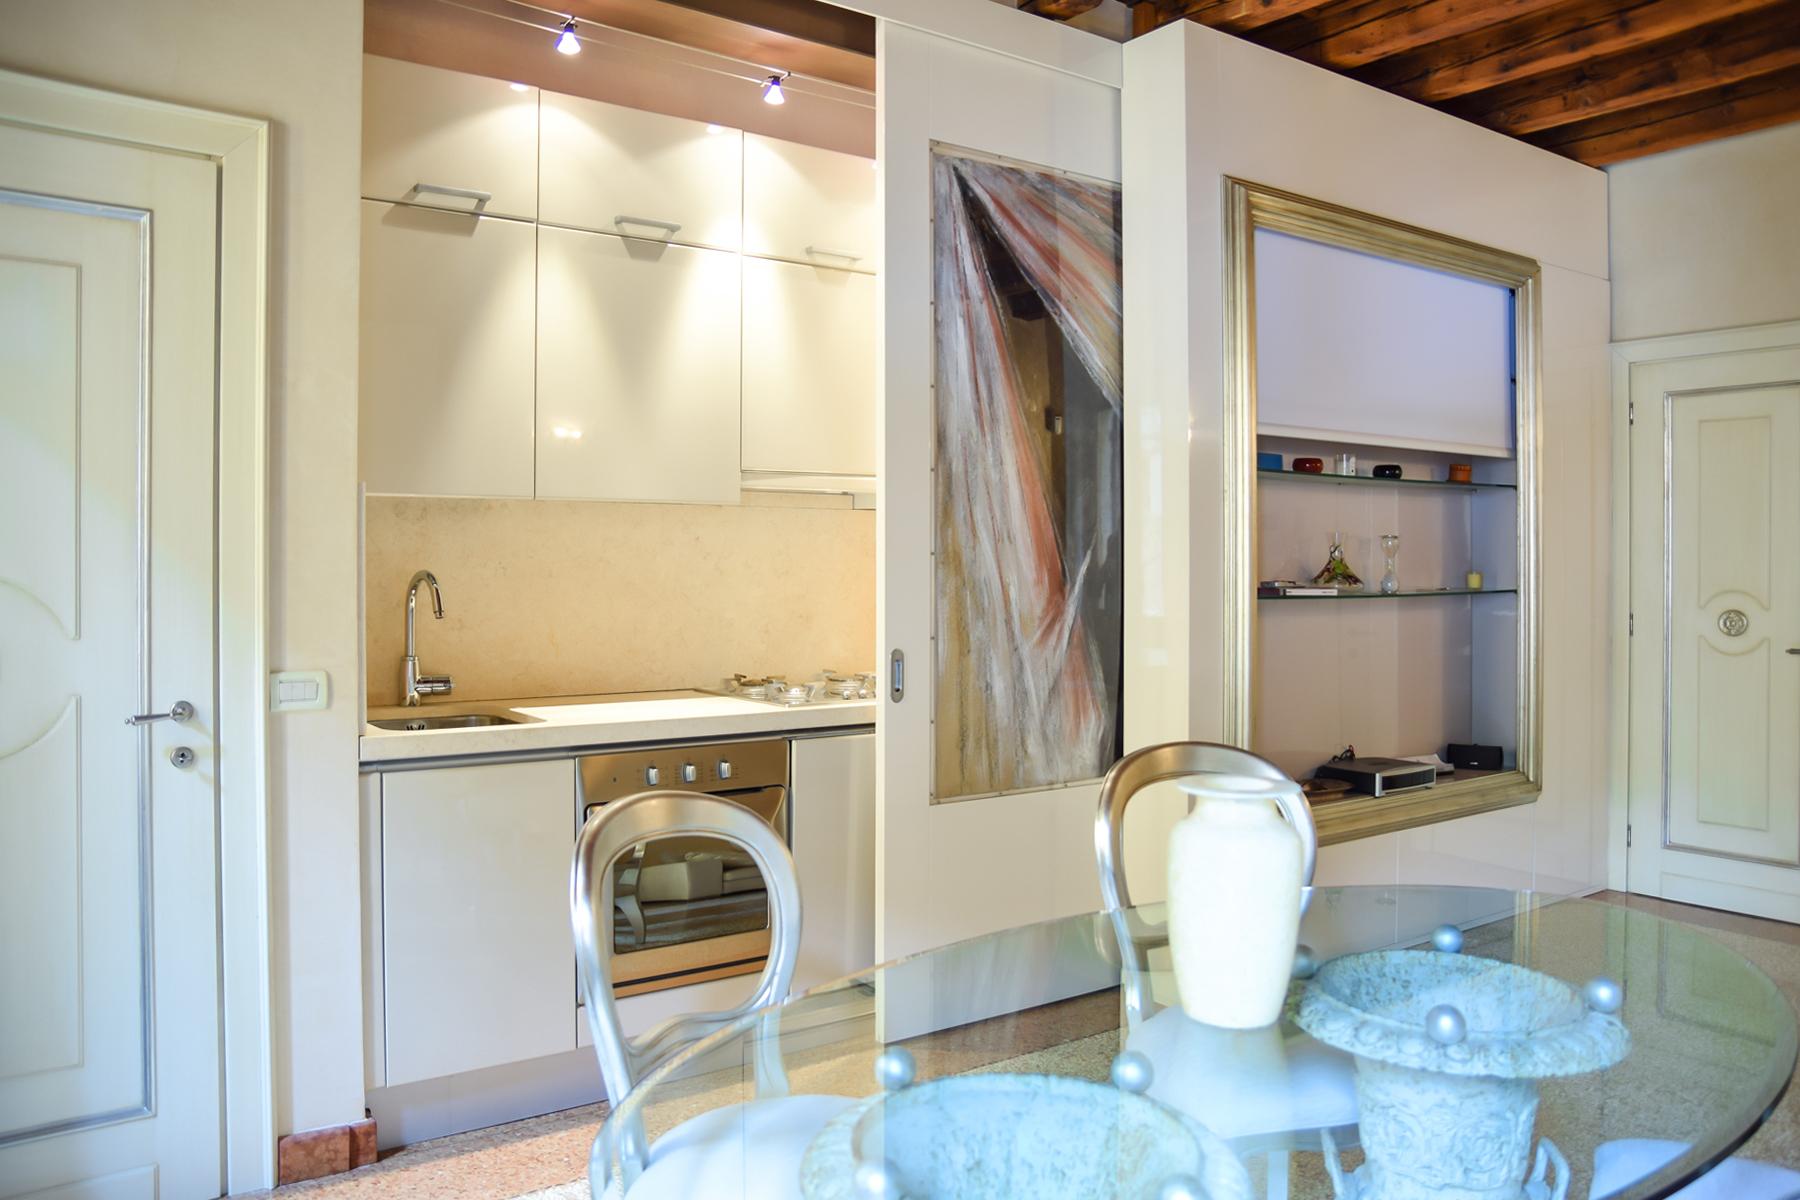 Exquisite apartment just few steps away from Piazza delle Erbe - 5